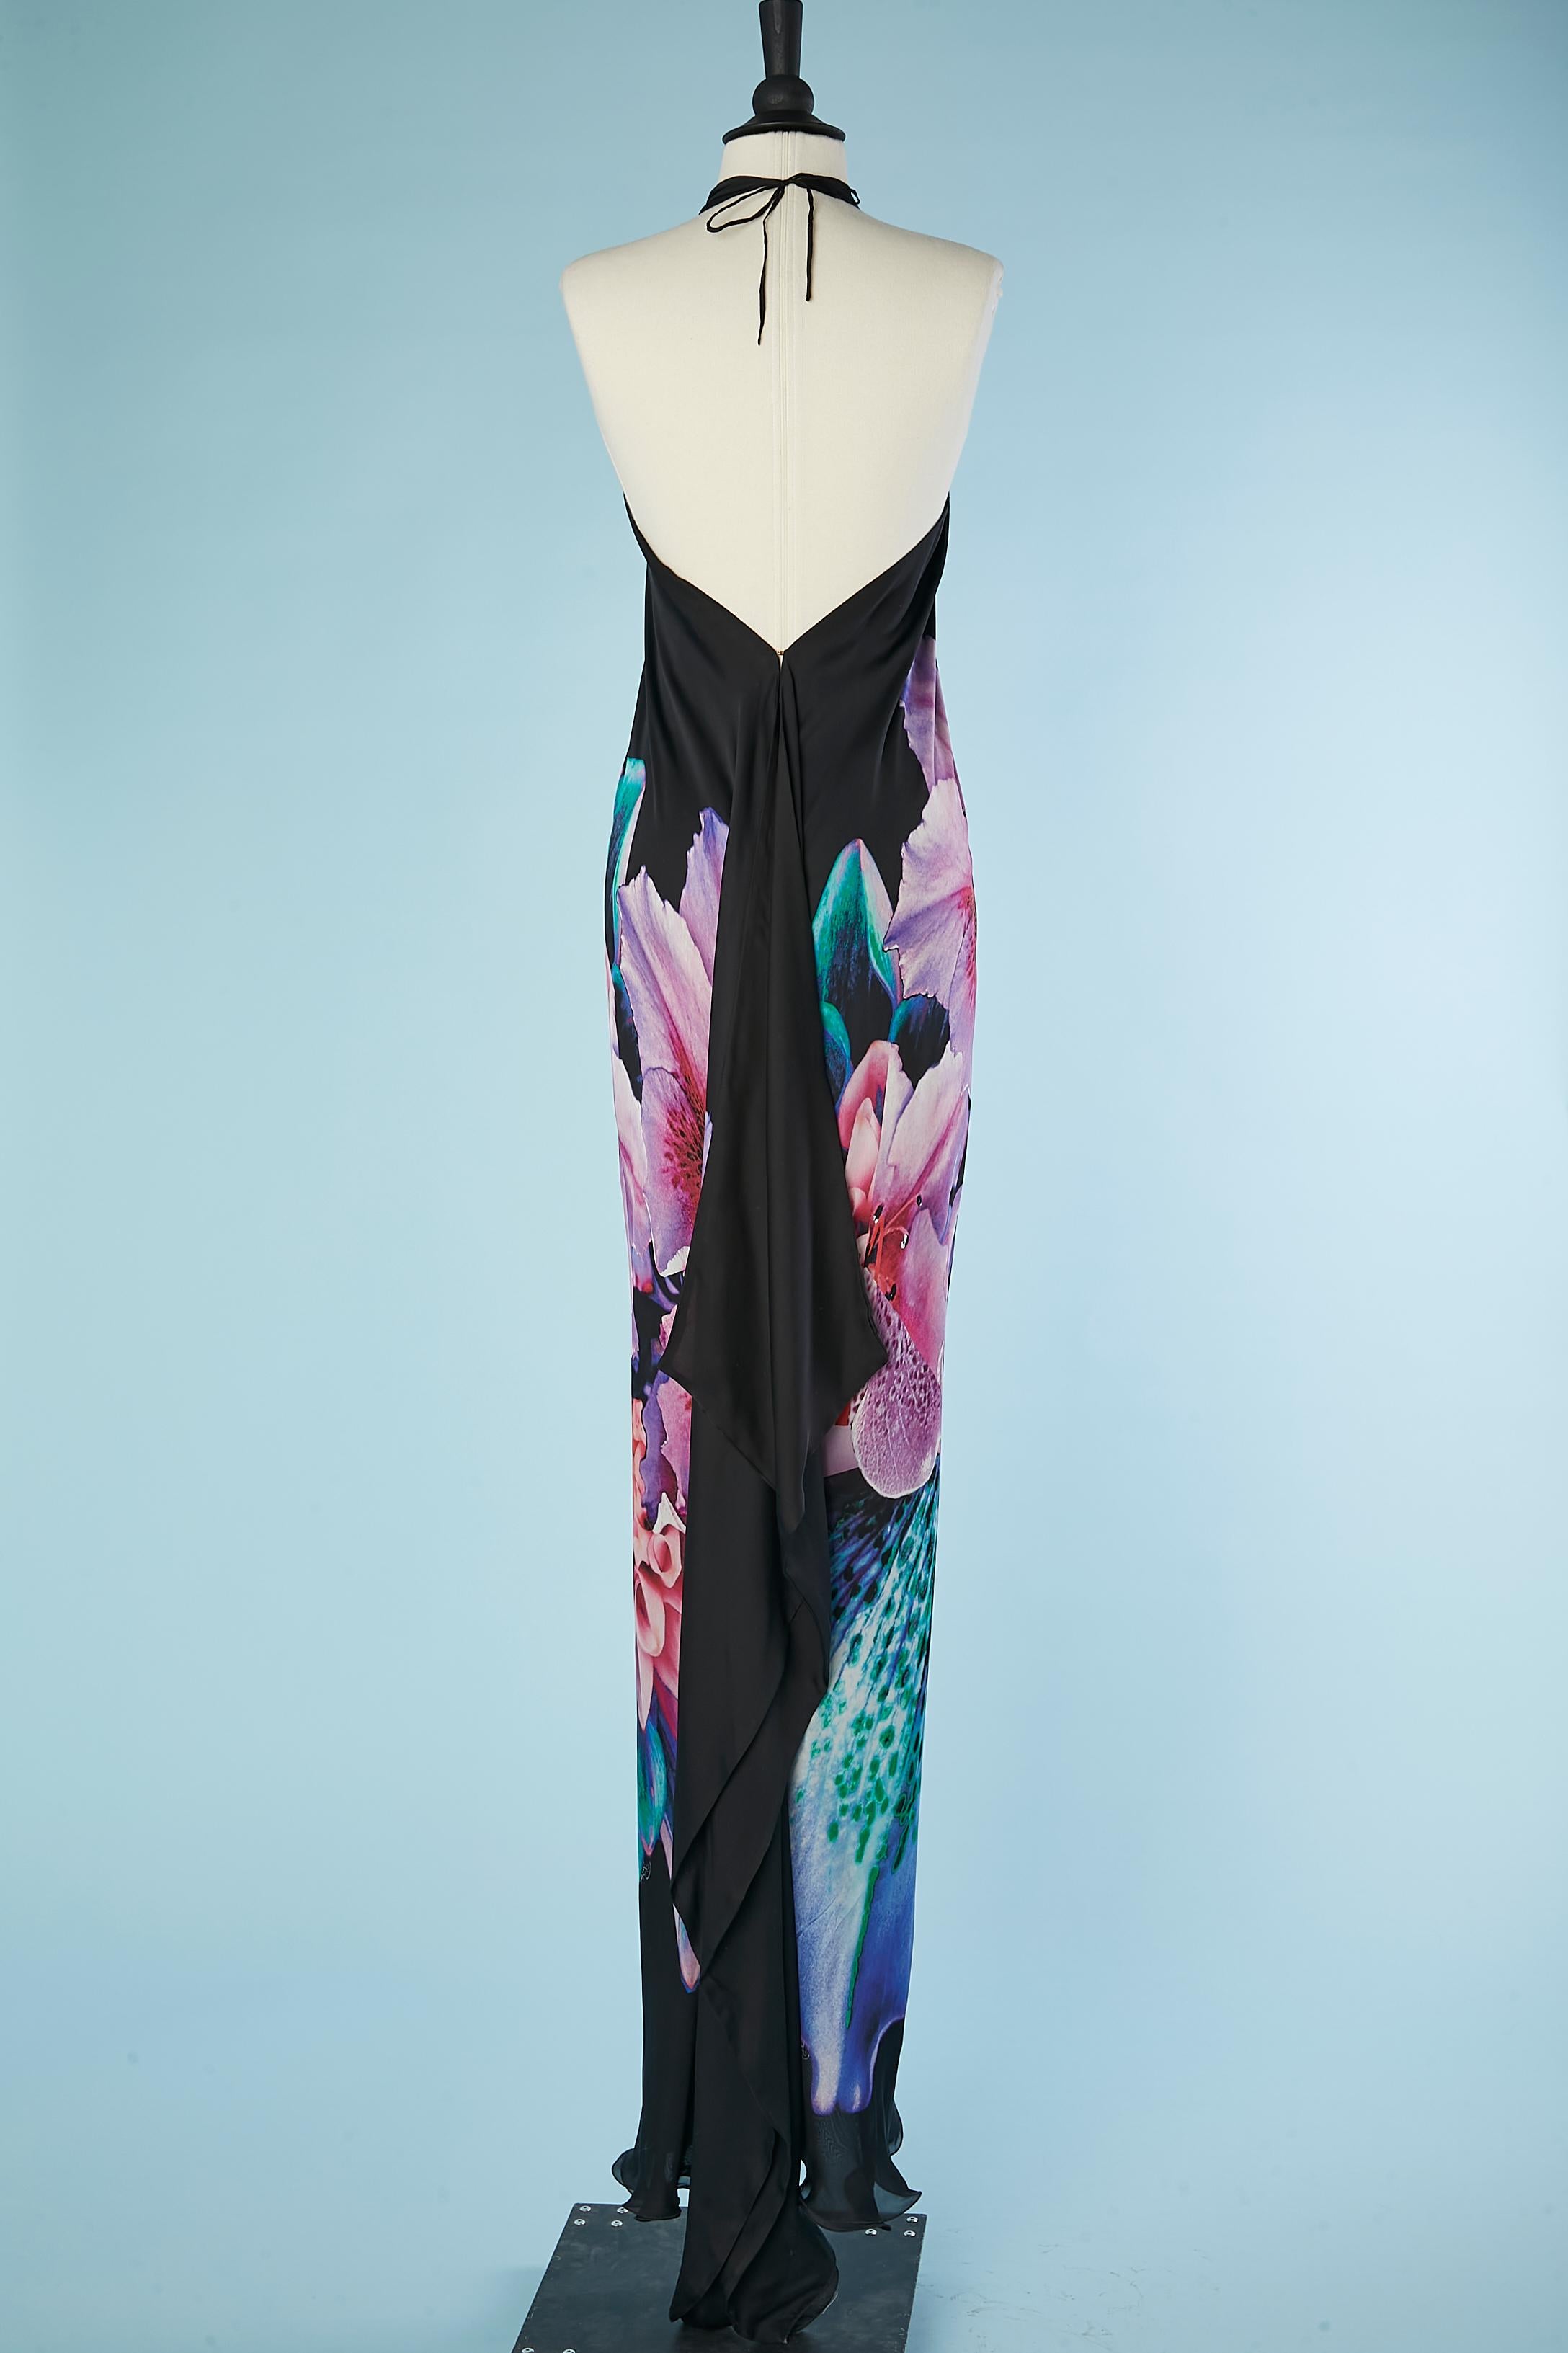 Backless silk flower printed evening dress with knot and drape Roberto CAVALLI  For Sale 3